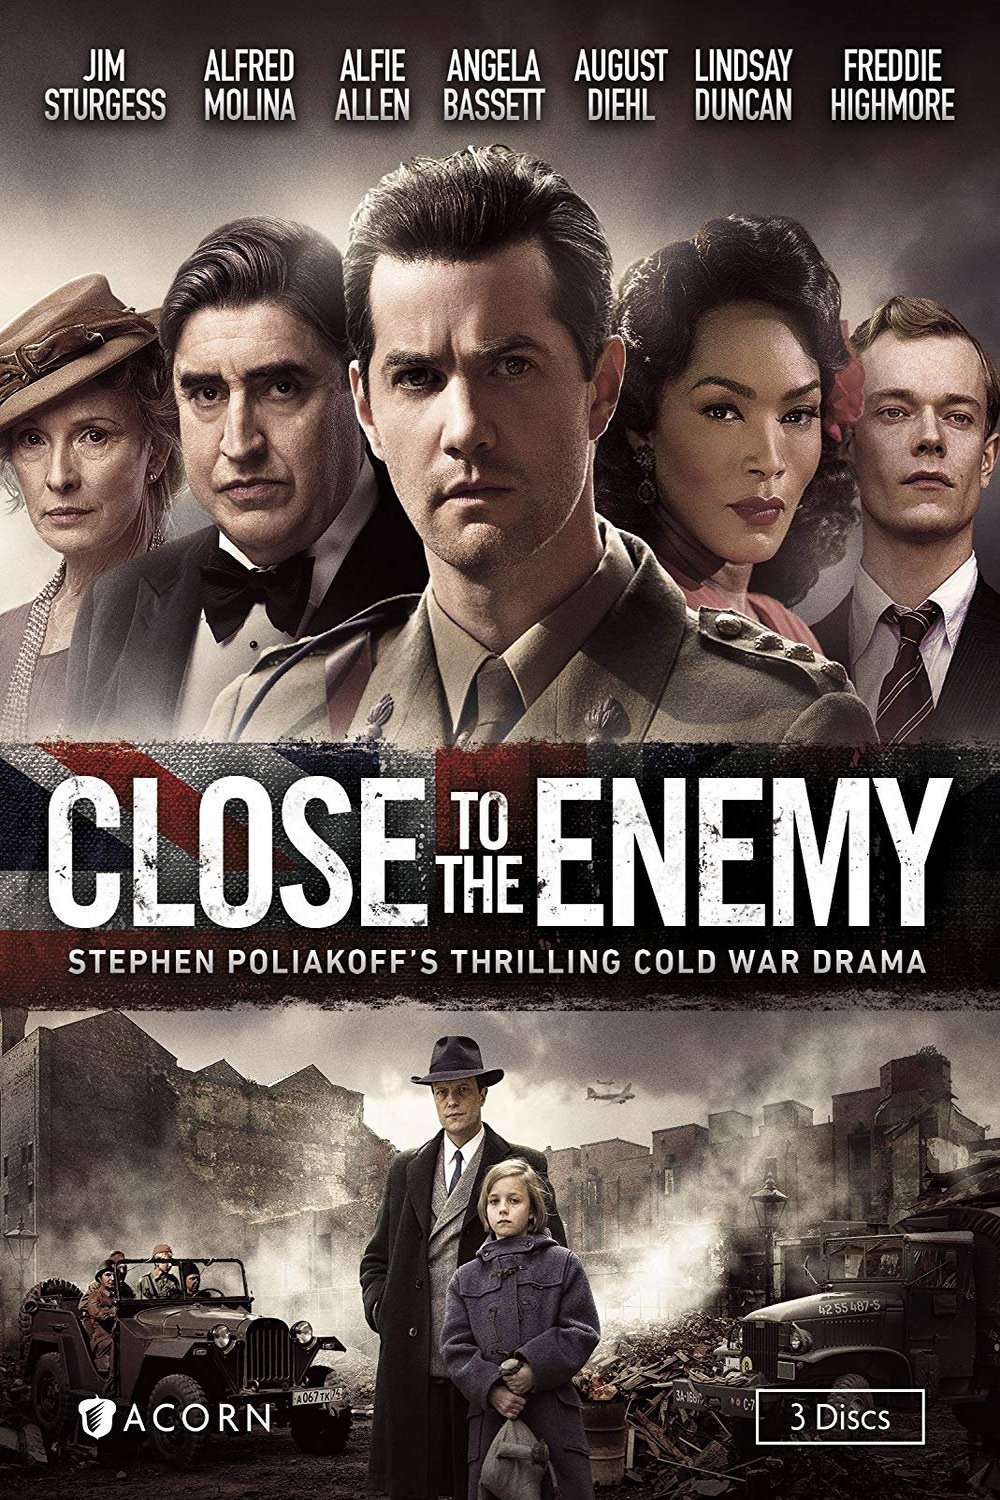 Poster of the movie Close to the Enemy